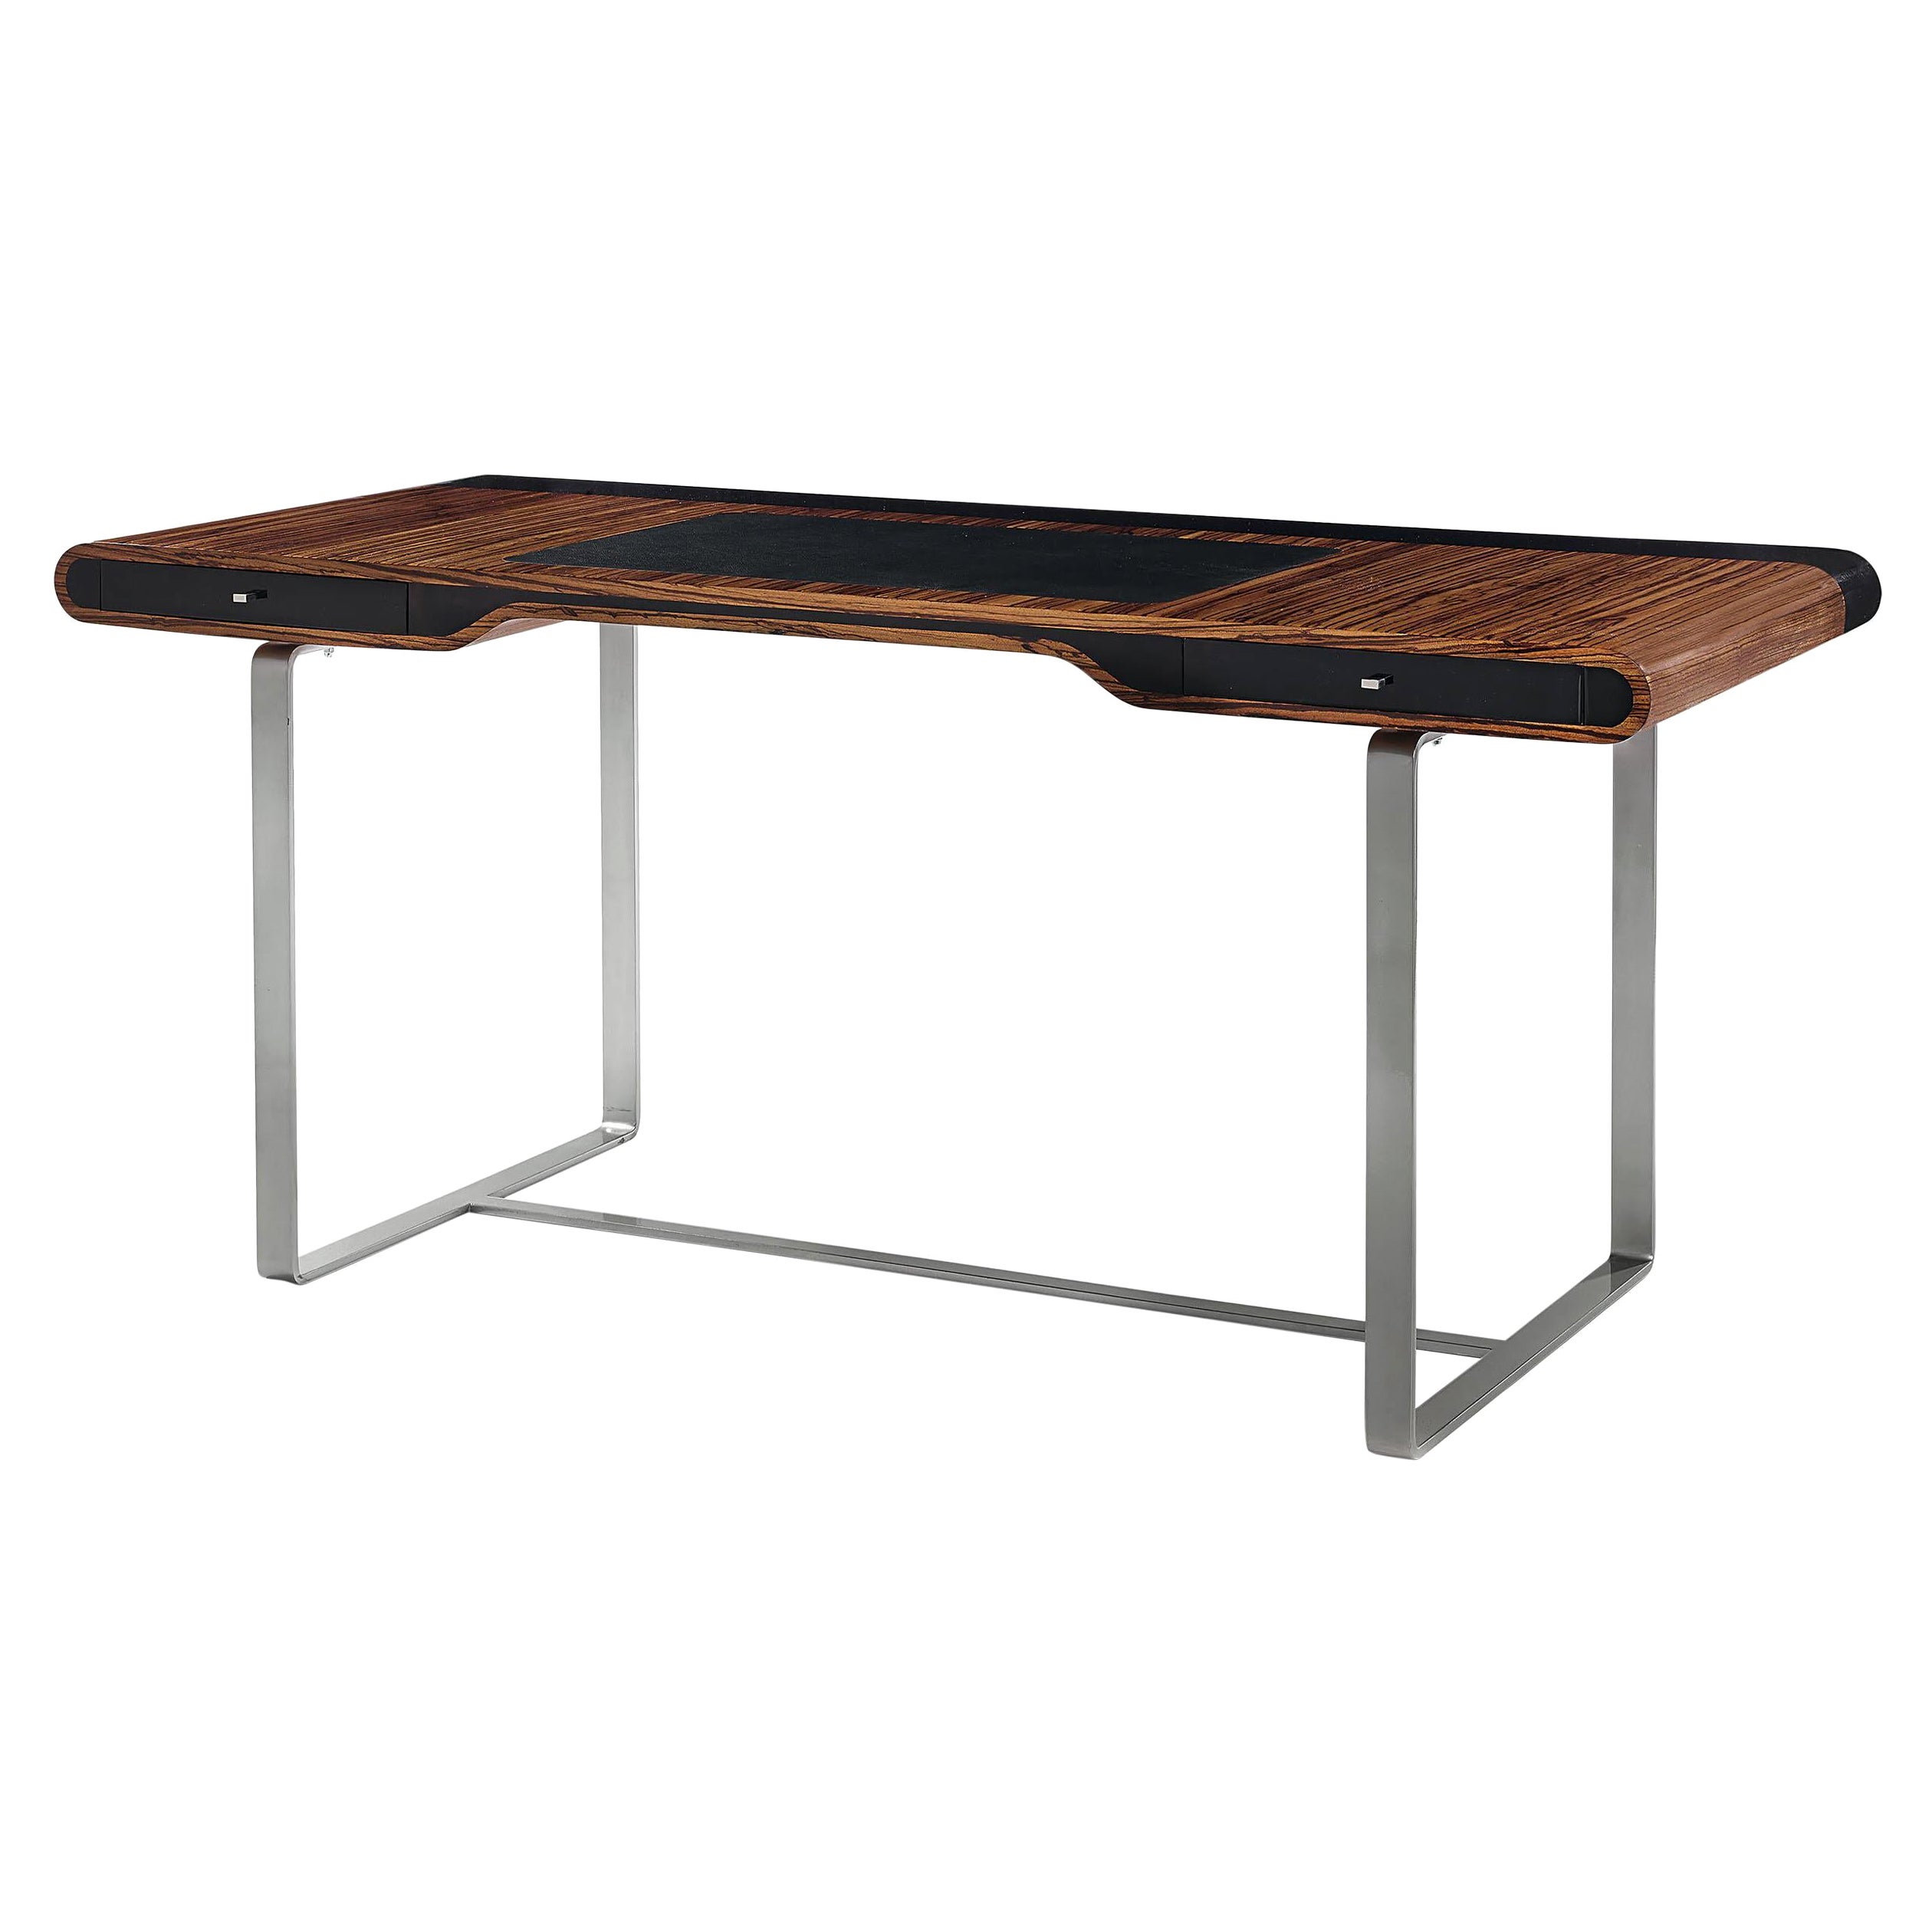 Little Shanghai Desk in Zebrano Wood and Black Sycomore Silver Painted Leg